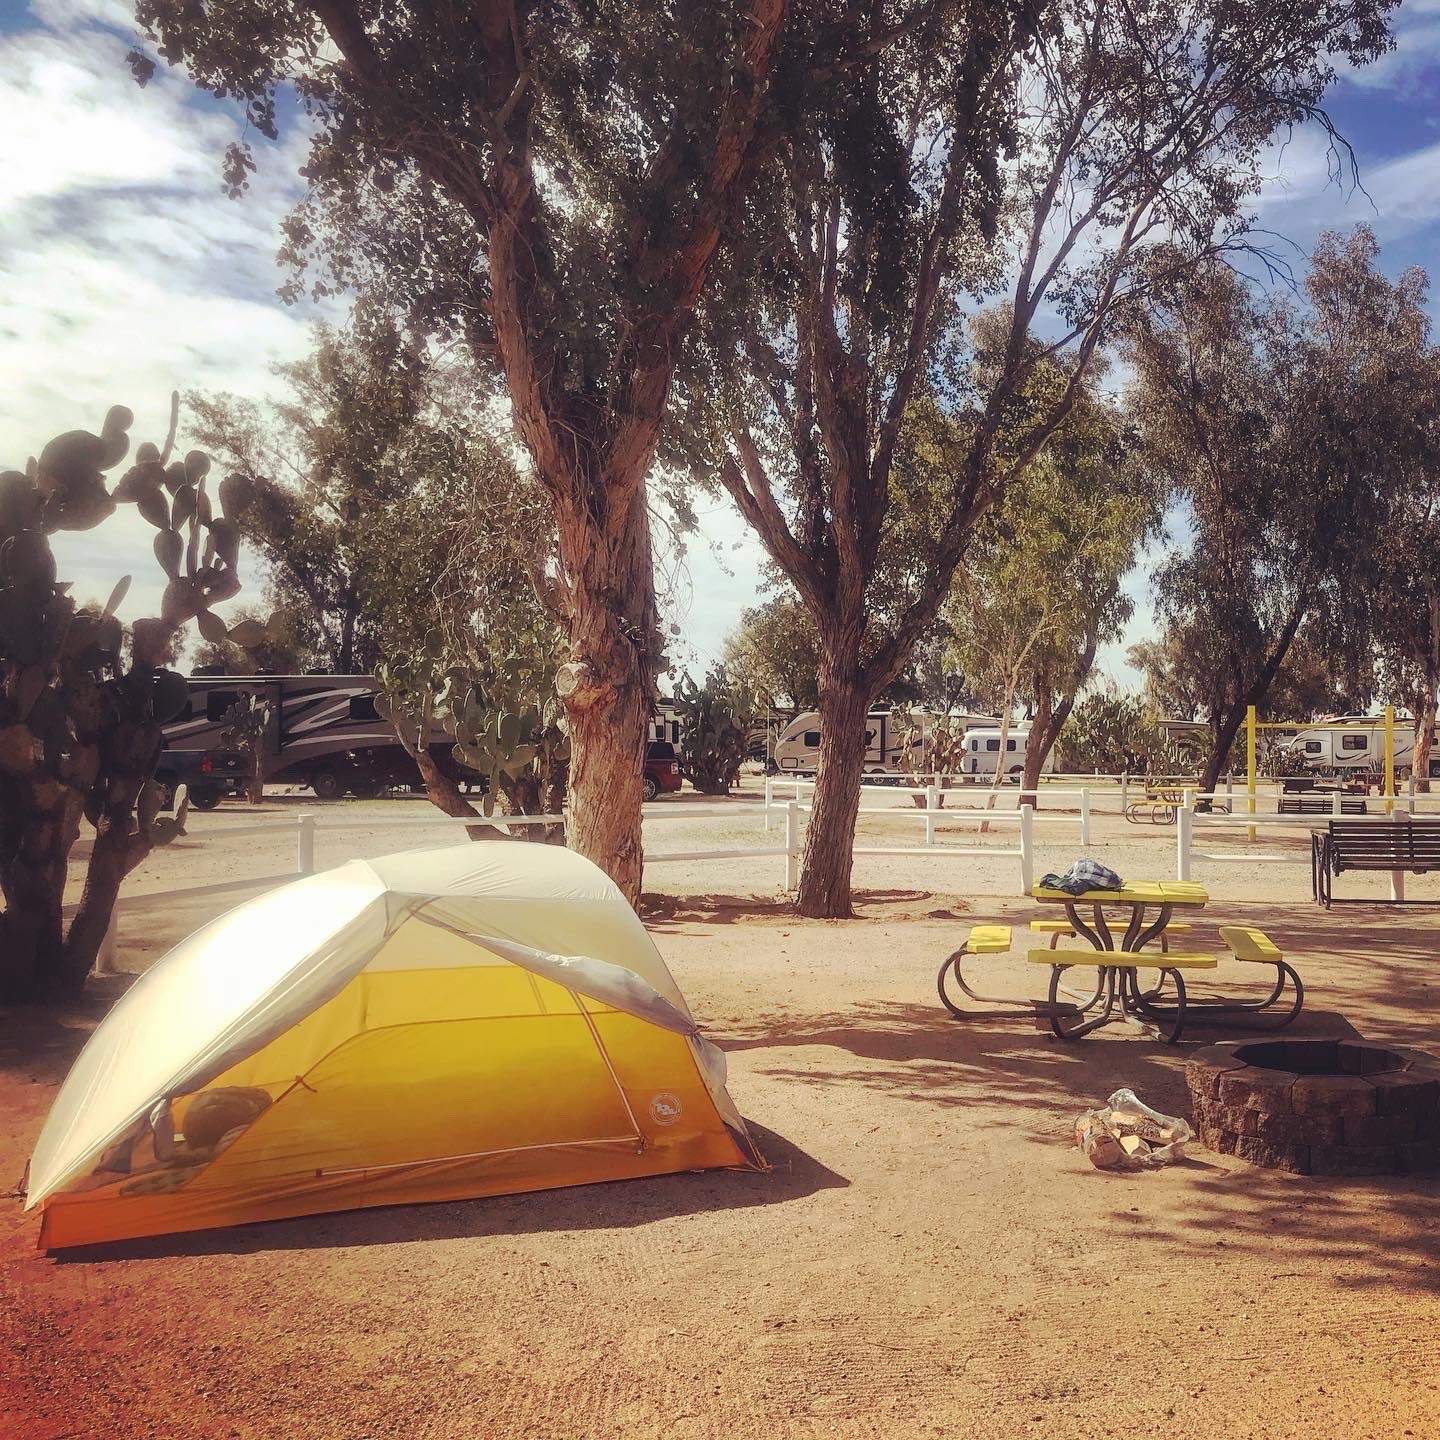 Camper submitted image from Picacho-Tucson NW KOA - 5